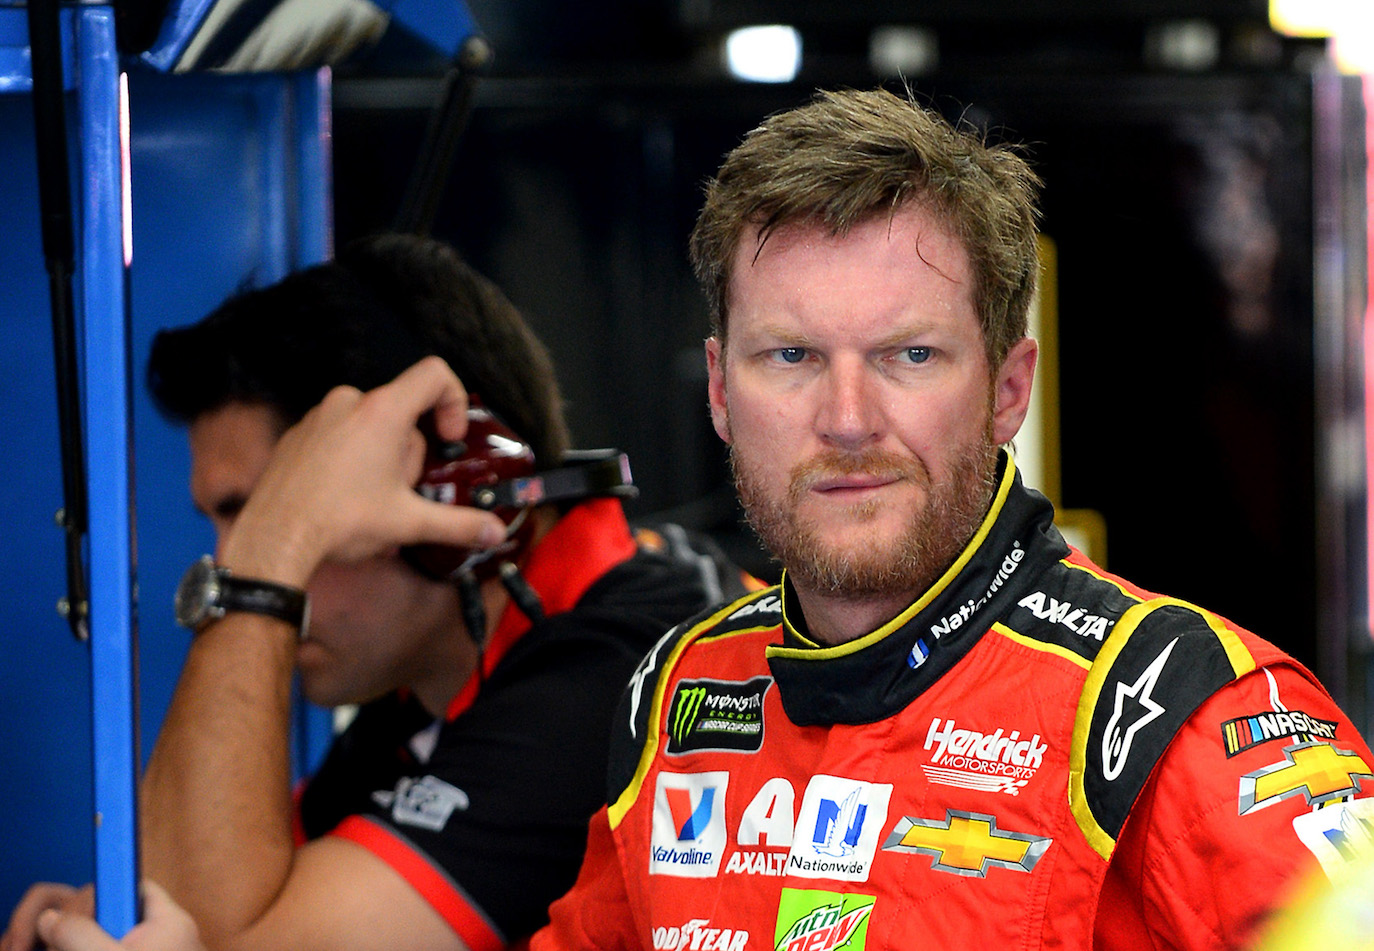 NASCAR driver Dale Earnhardt Jr. is irritated with his car as he waits for his team to make adjustments during the Monster Energy All-Star race practice at Charlotte Motor Speedway Friday, May 19, 2017 in Concord, North Carolina